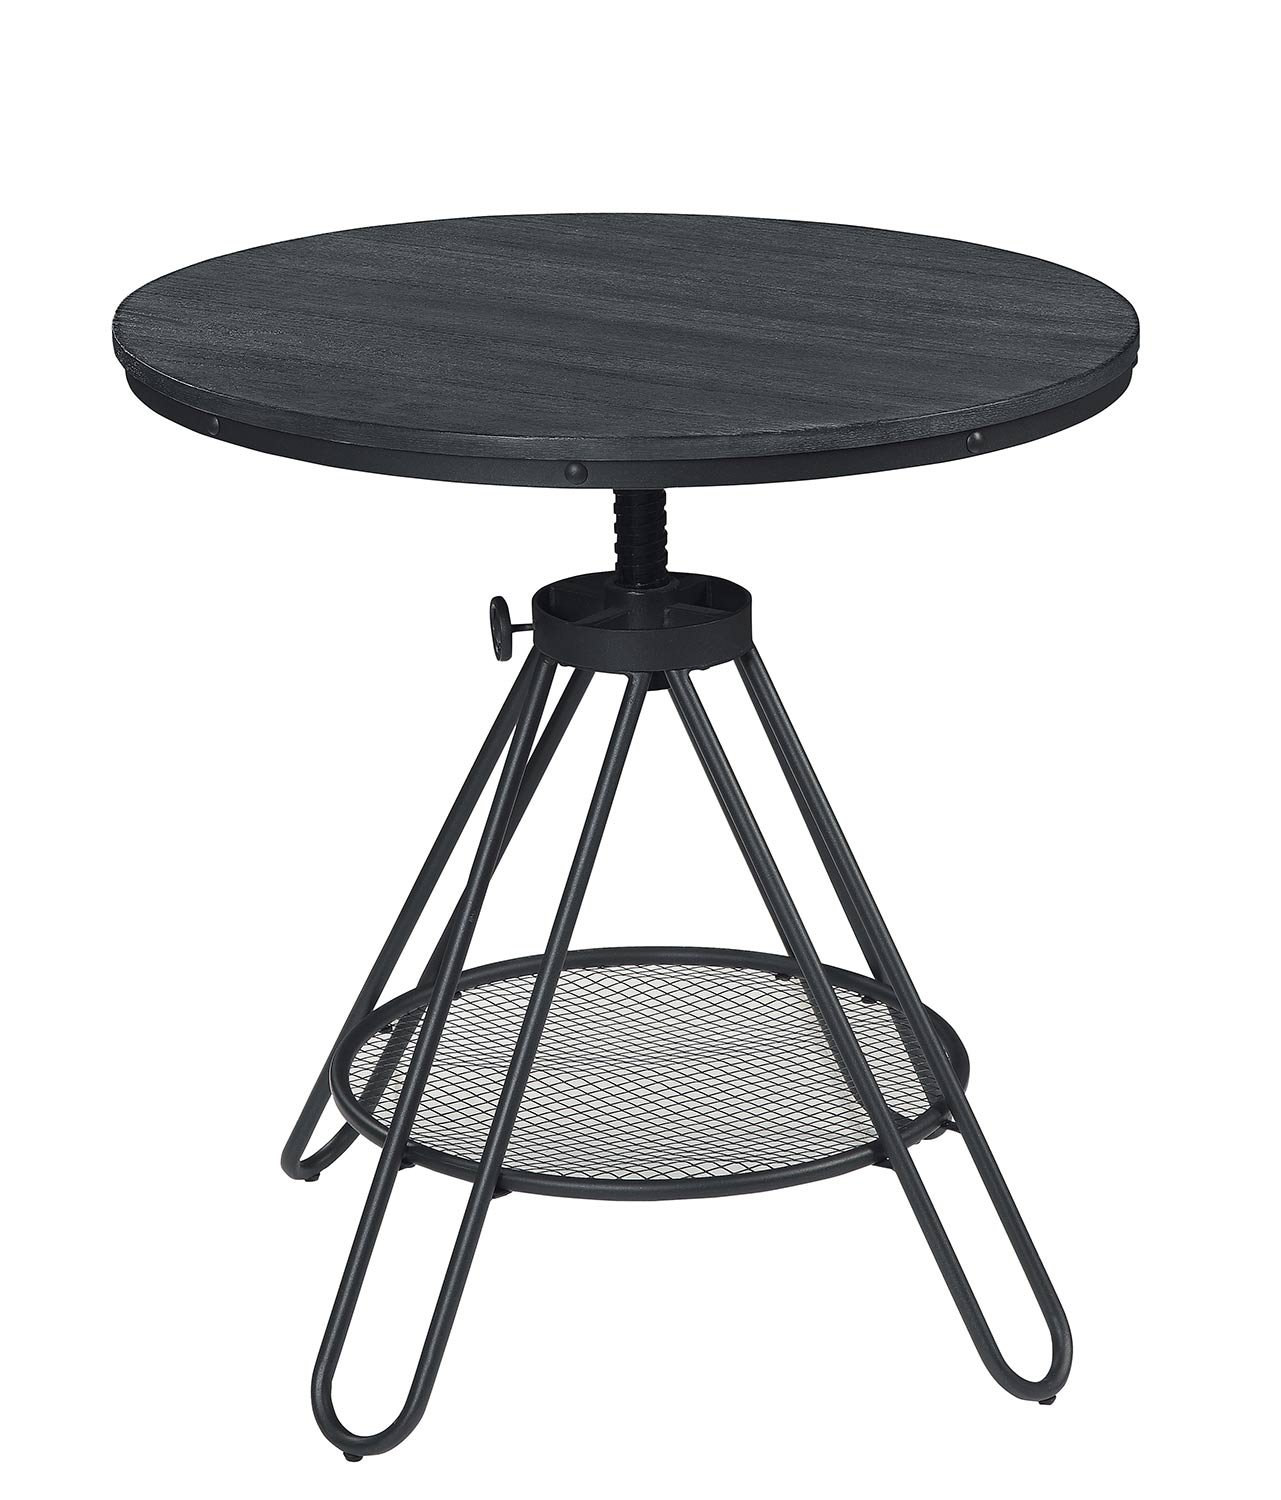 Homelegance Cirrus Adjustable Round Dining Table - Weathered Gray